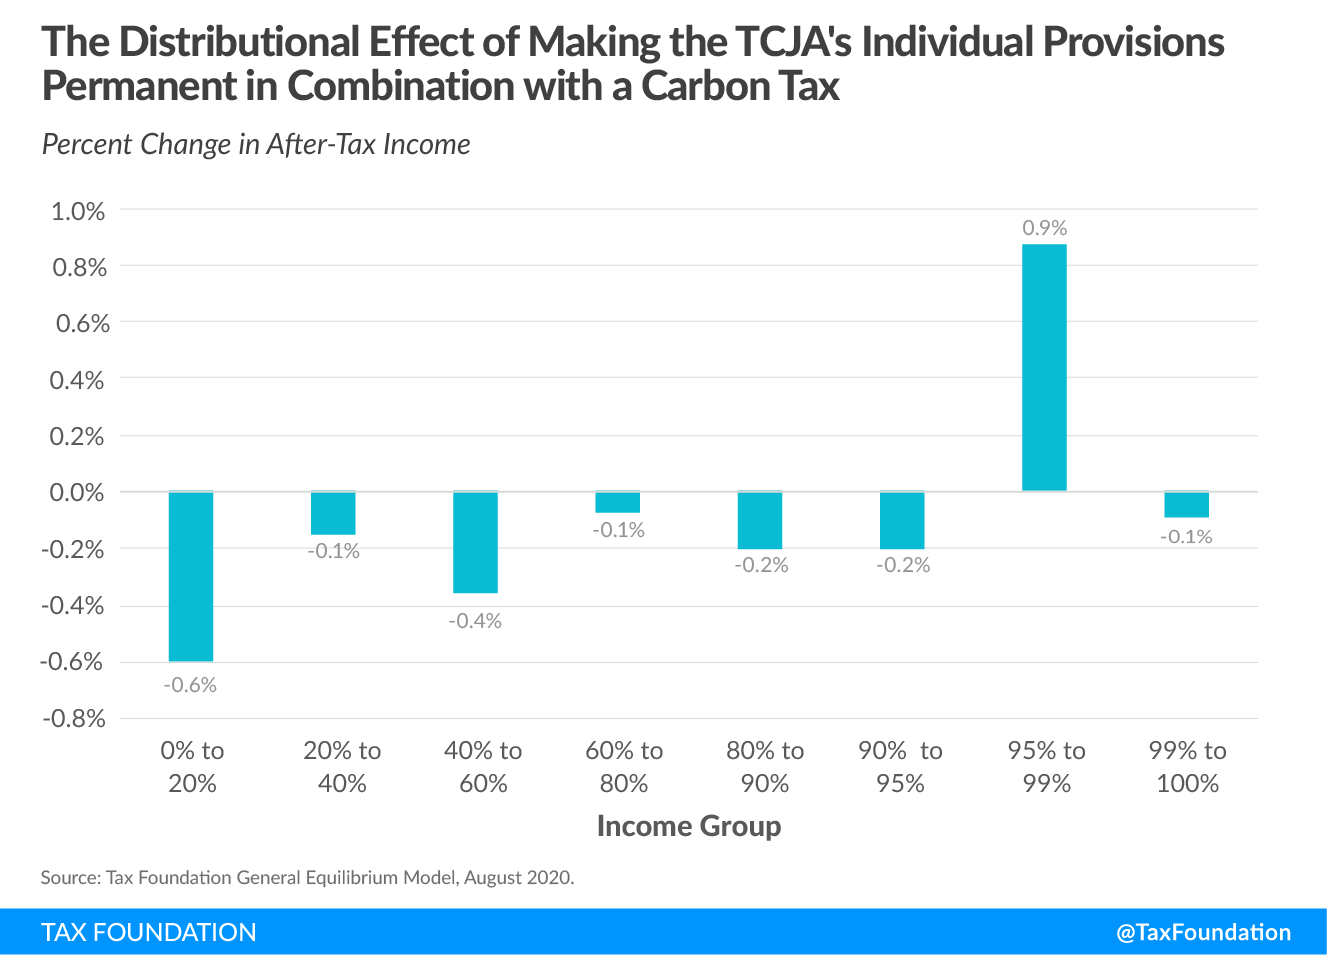 The distributional effect of making the Tax Cuts and Jobs Act TCJA individual provisions permanent in combination with a US carbon tax